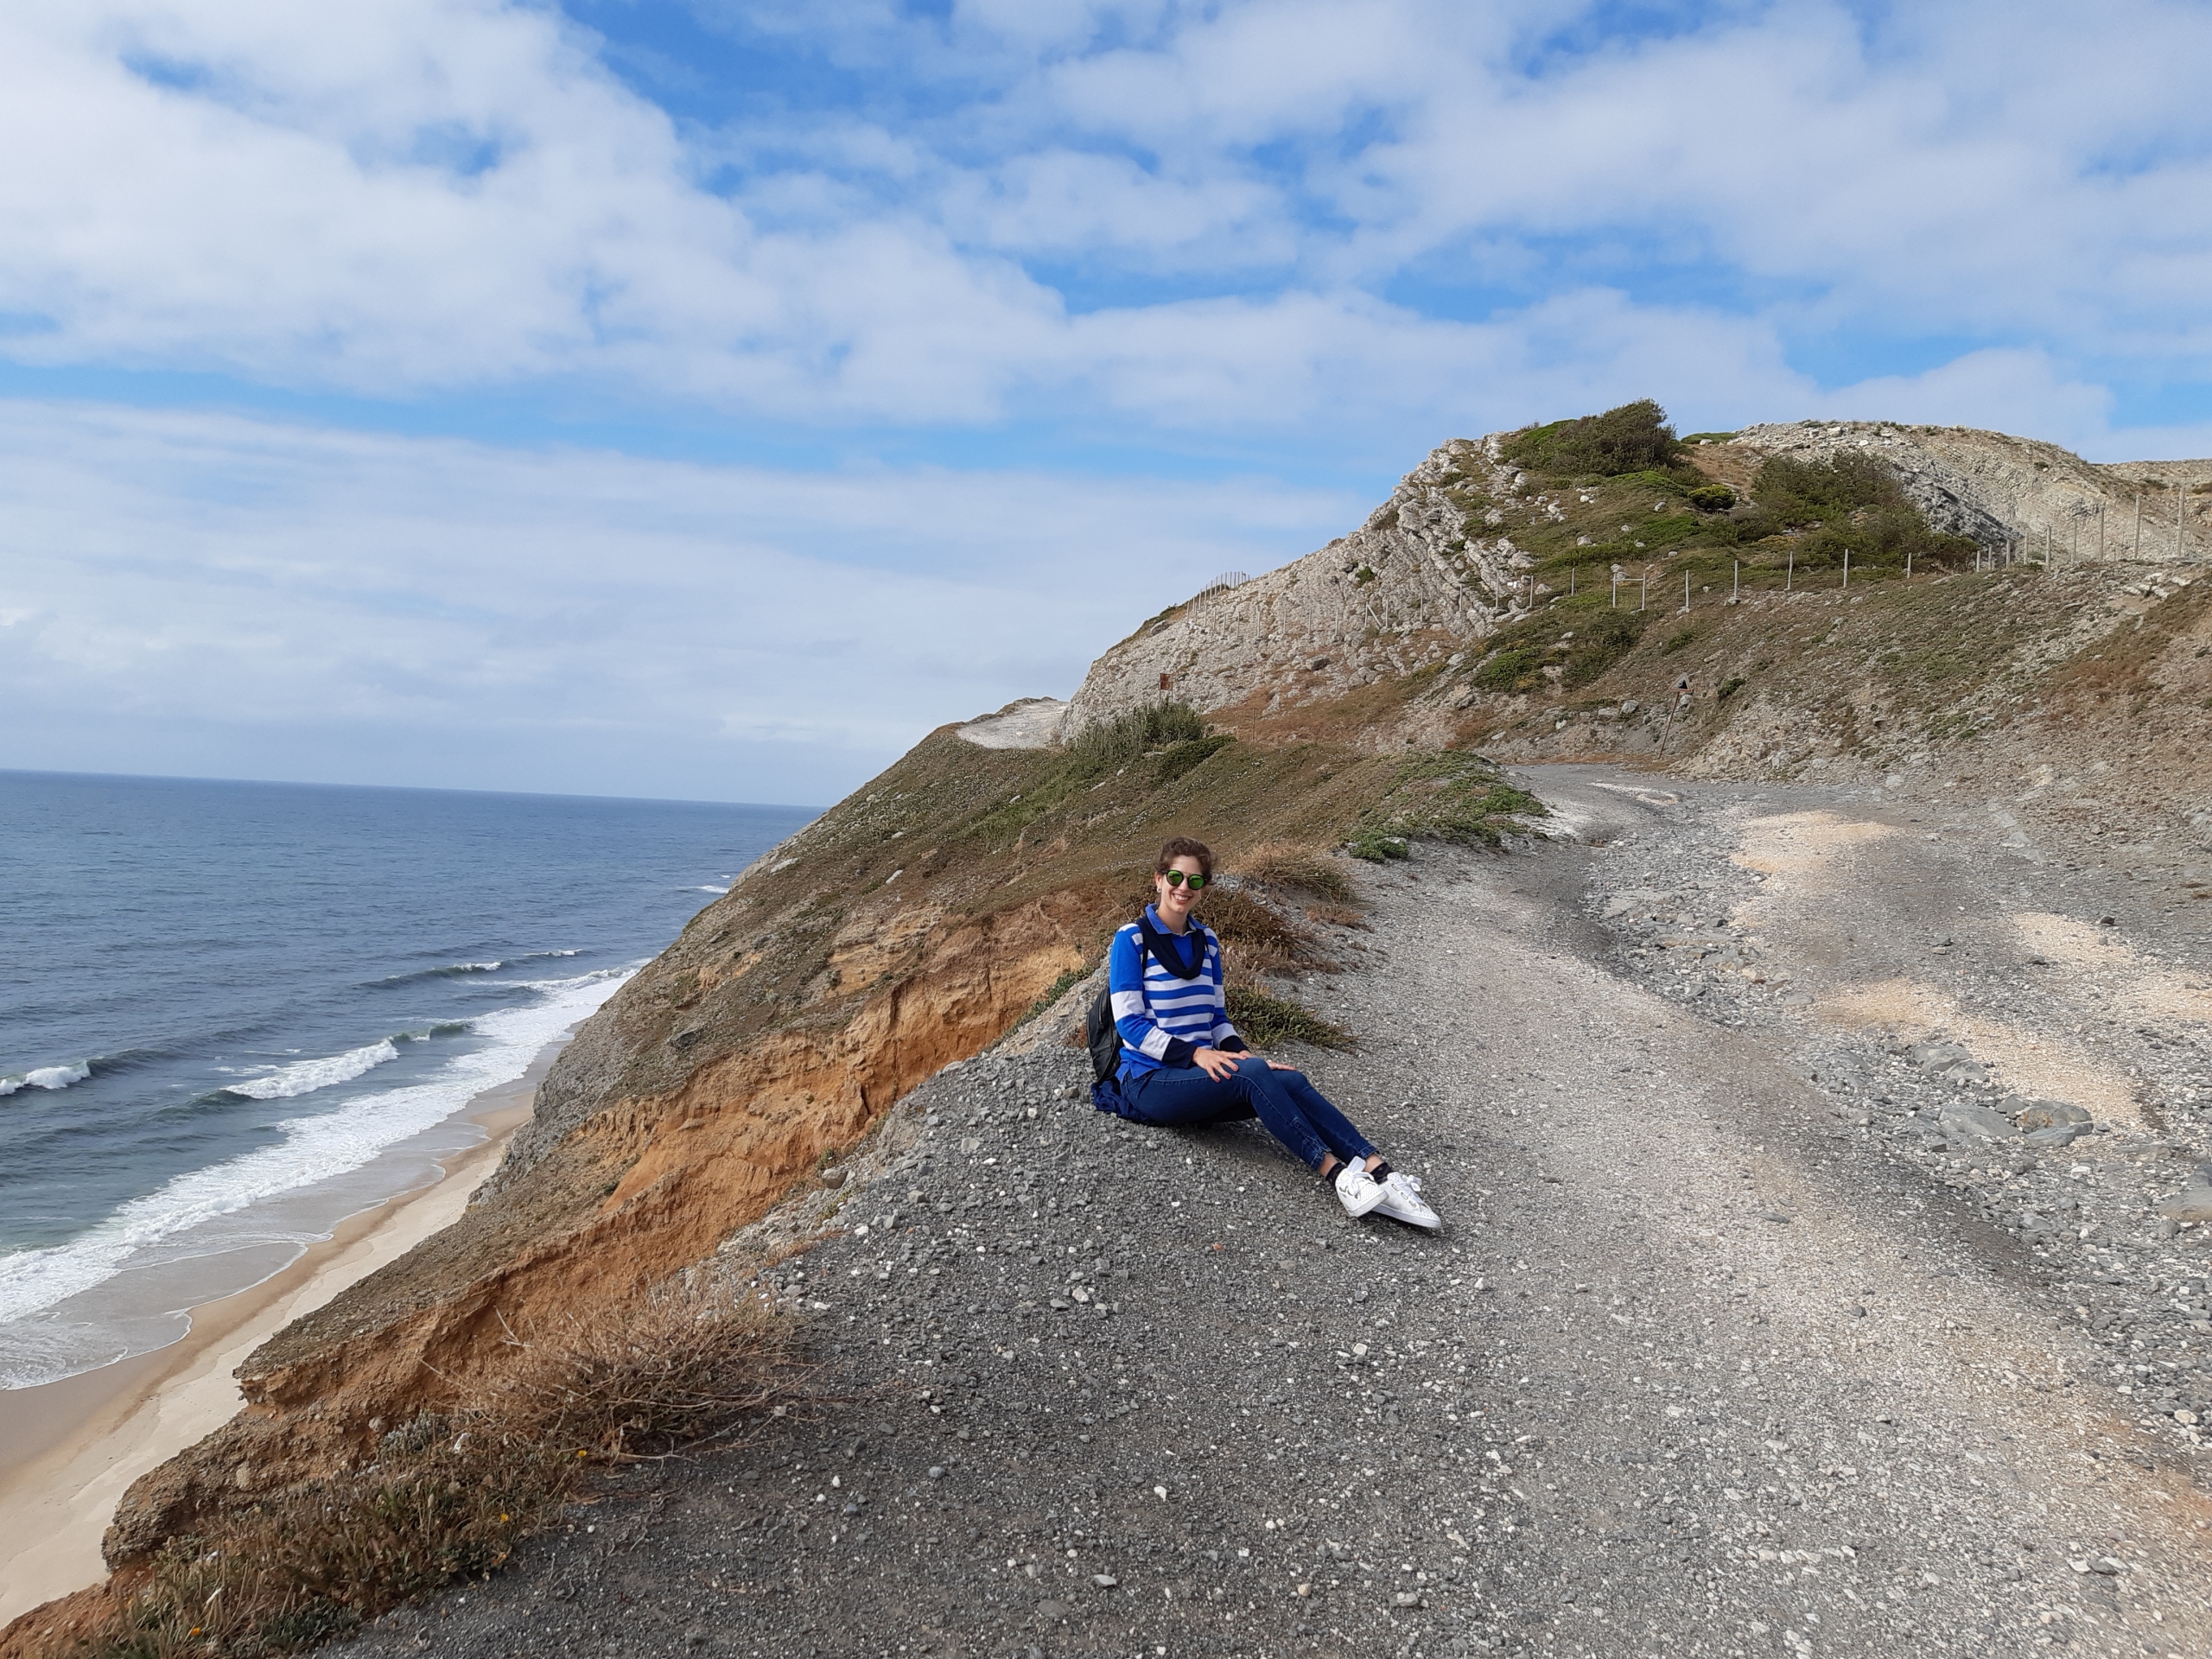 Roadtrip to the center of Portugal